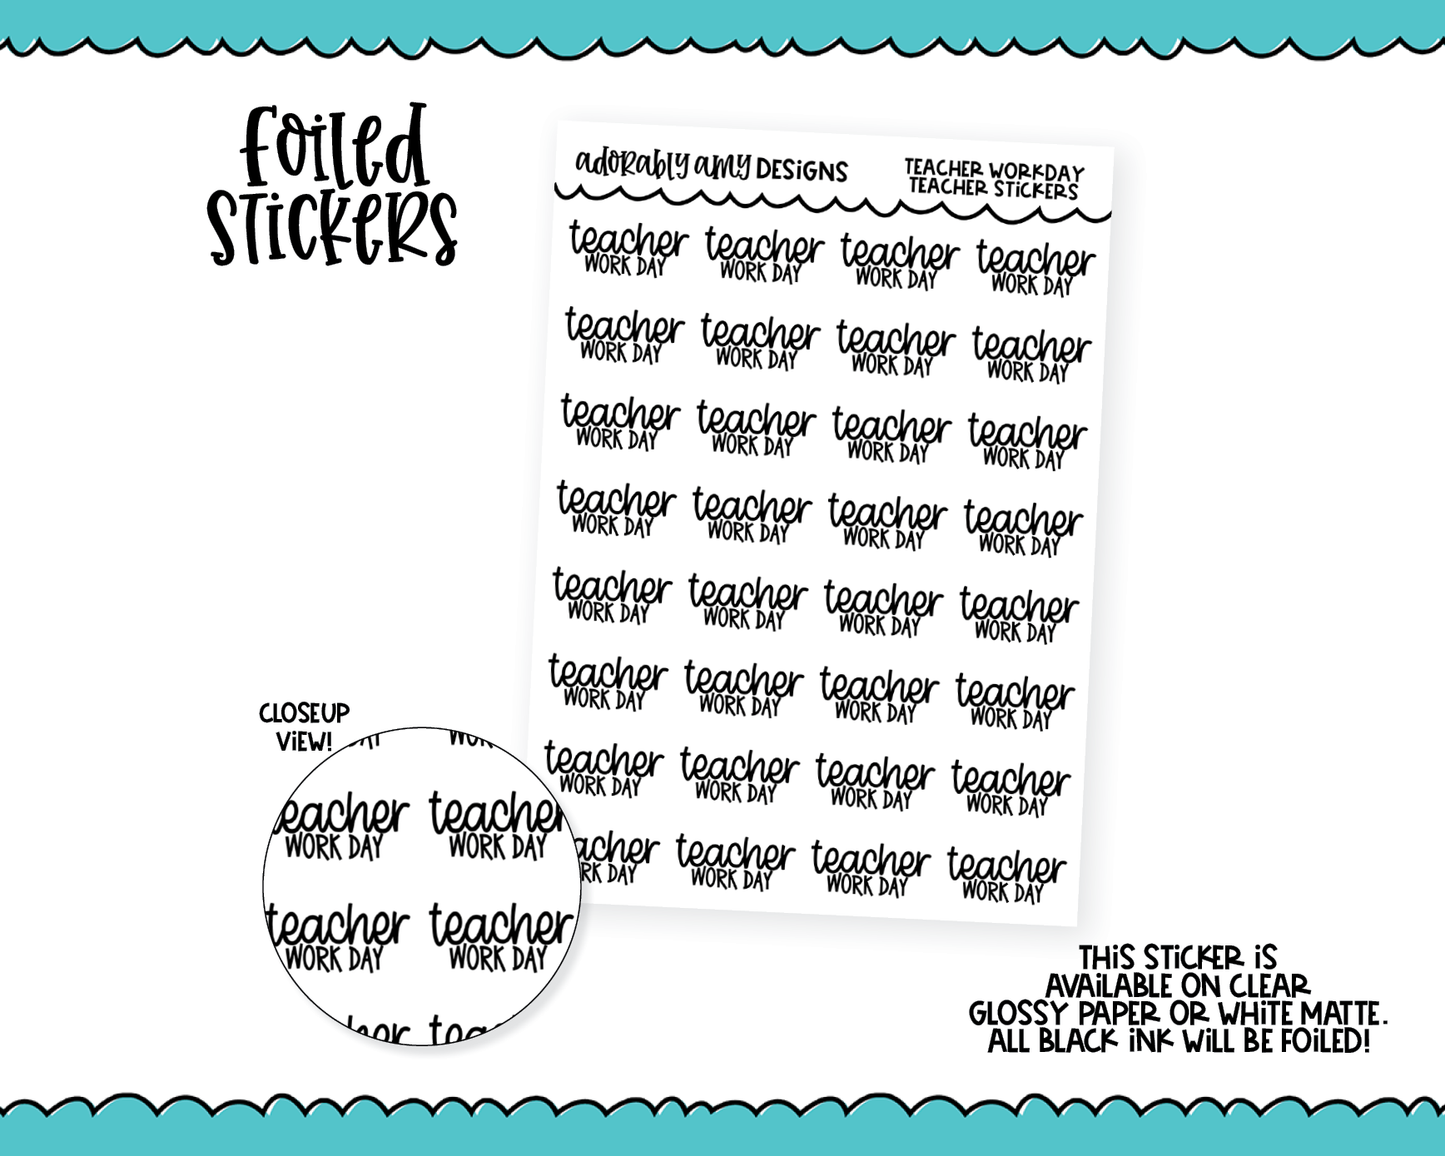 Foiled Teacher Workday V5 Reminder Typography Planner Stickers for any Planner or Insert